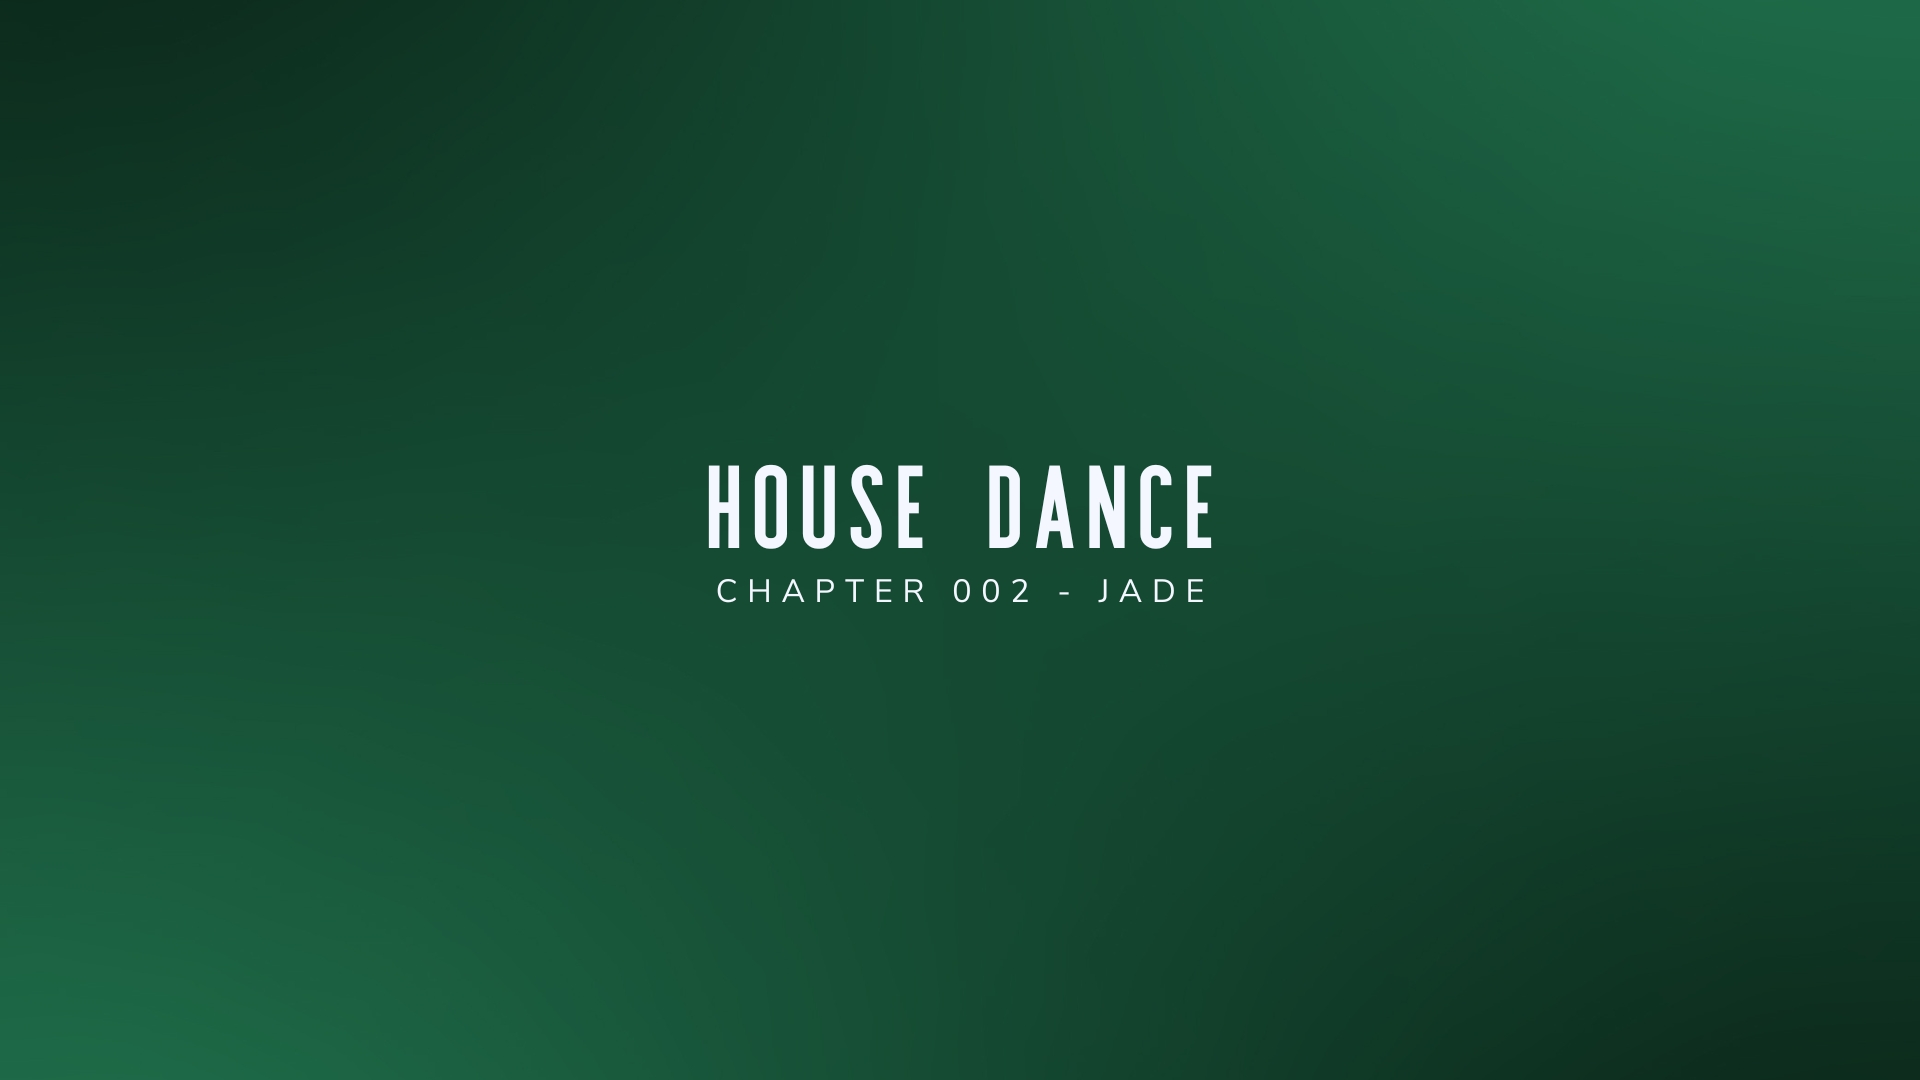 House Dance Session - Chapter 002 - JADE